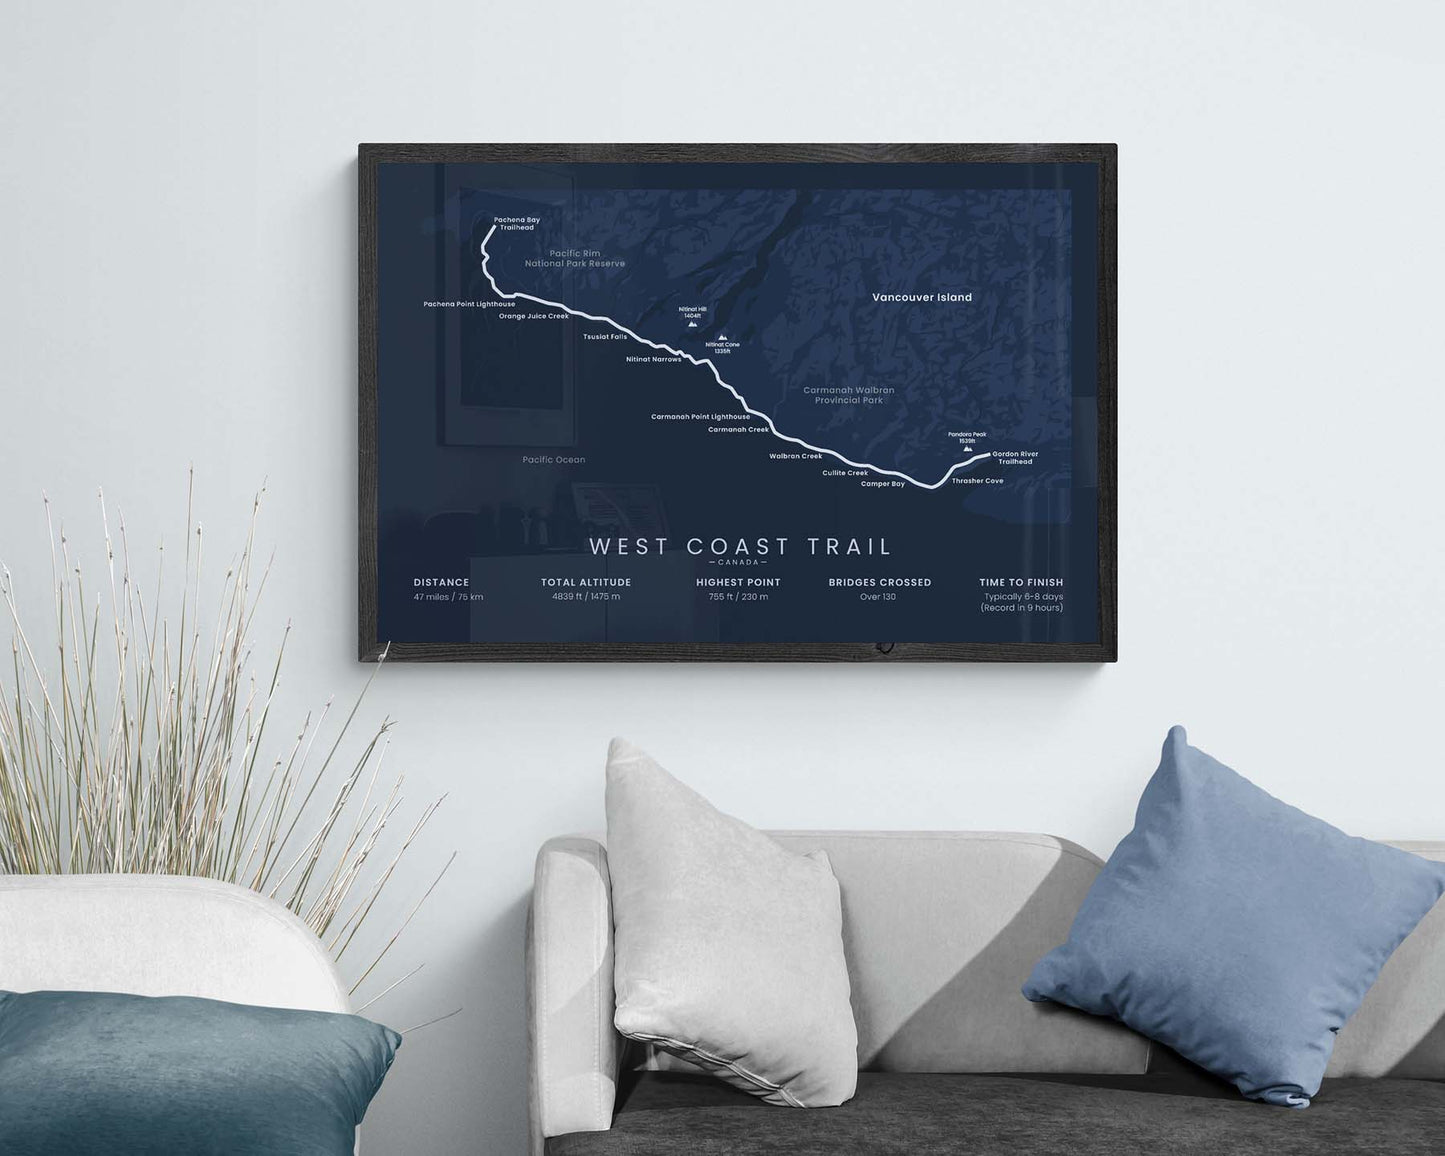 West Coast Trail trail map art in minimal room decor (Vancouver Island)